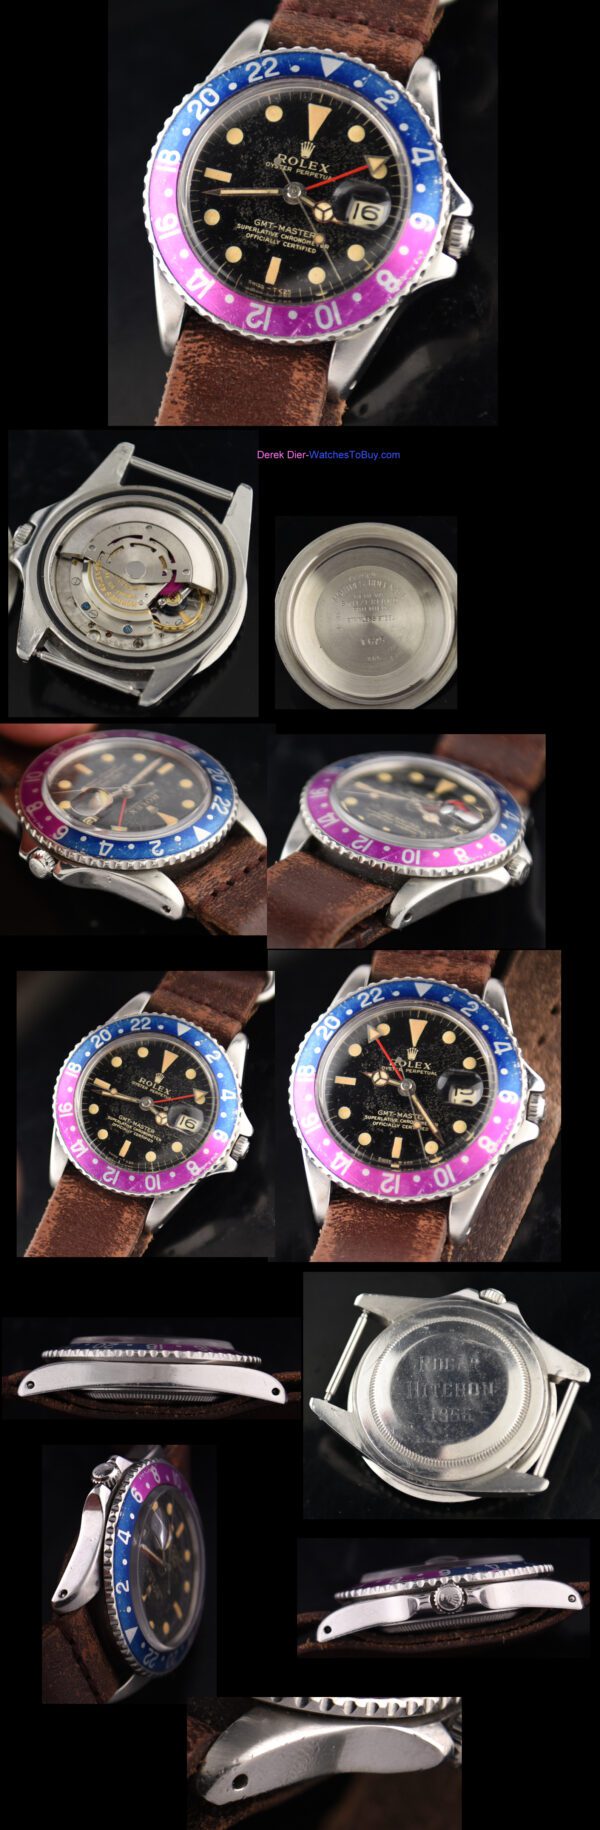 1966 Rolex GMT Master stainless steel watch with original gilt dial, deep-vanilla lume, case, replaced 24-hour hand, and automatic movement.